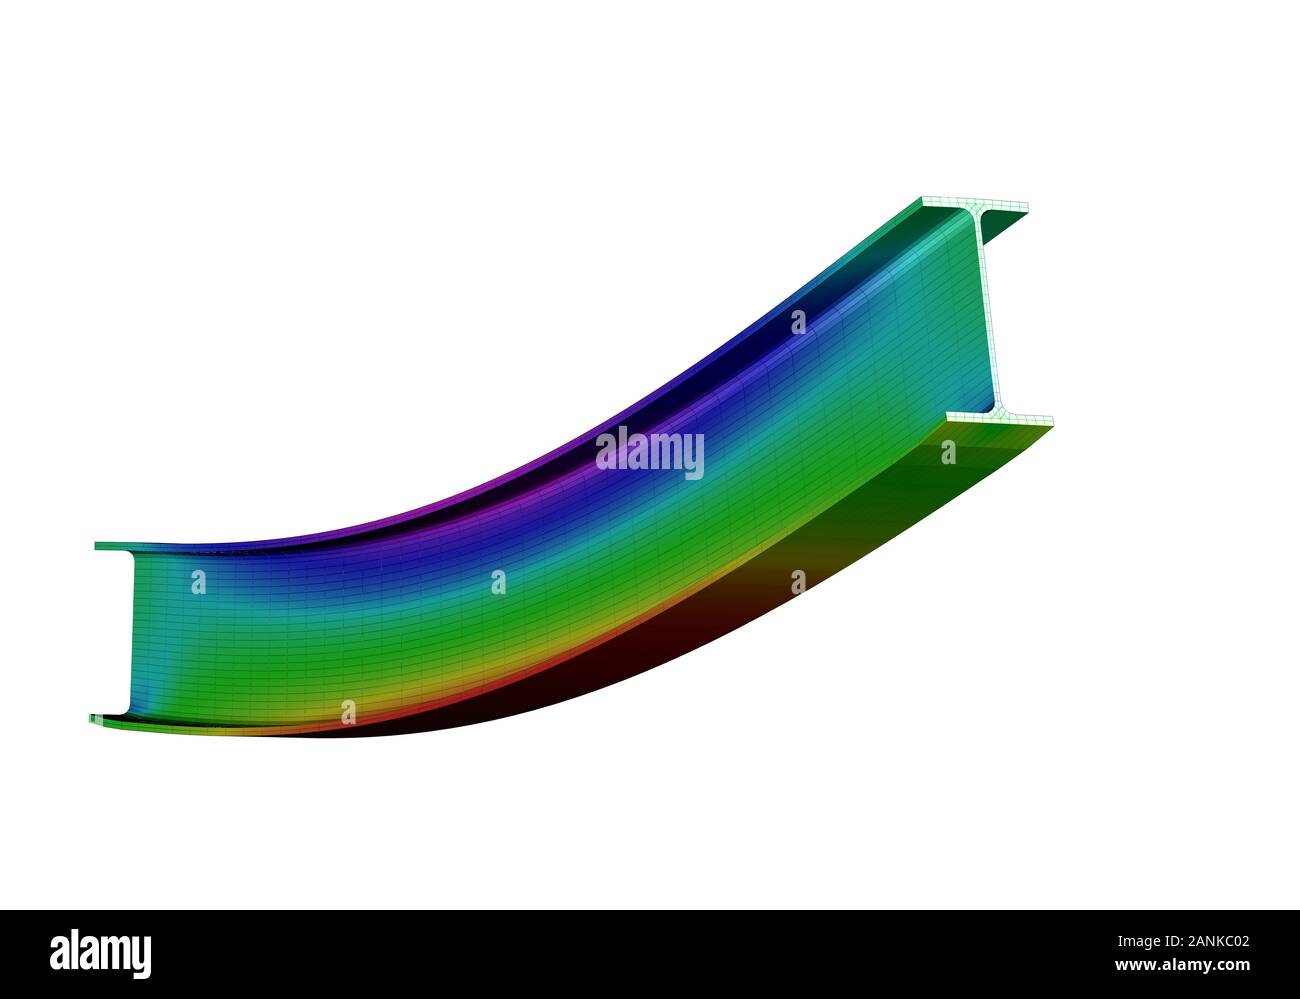 A Simple Supported I Beam 3d View Of Mesh Deformation And Plot Of Normal Stresses From Finite Element Analysis On White Backround Stock Photo Alamy